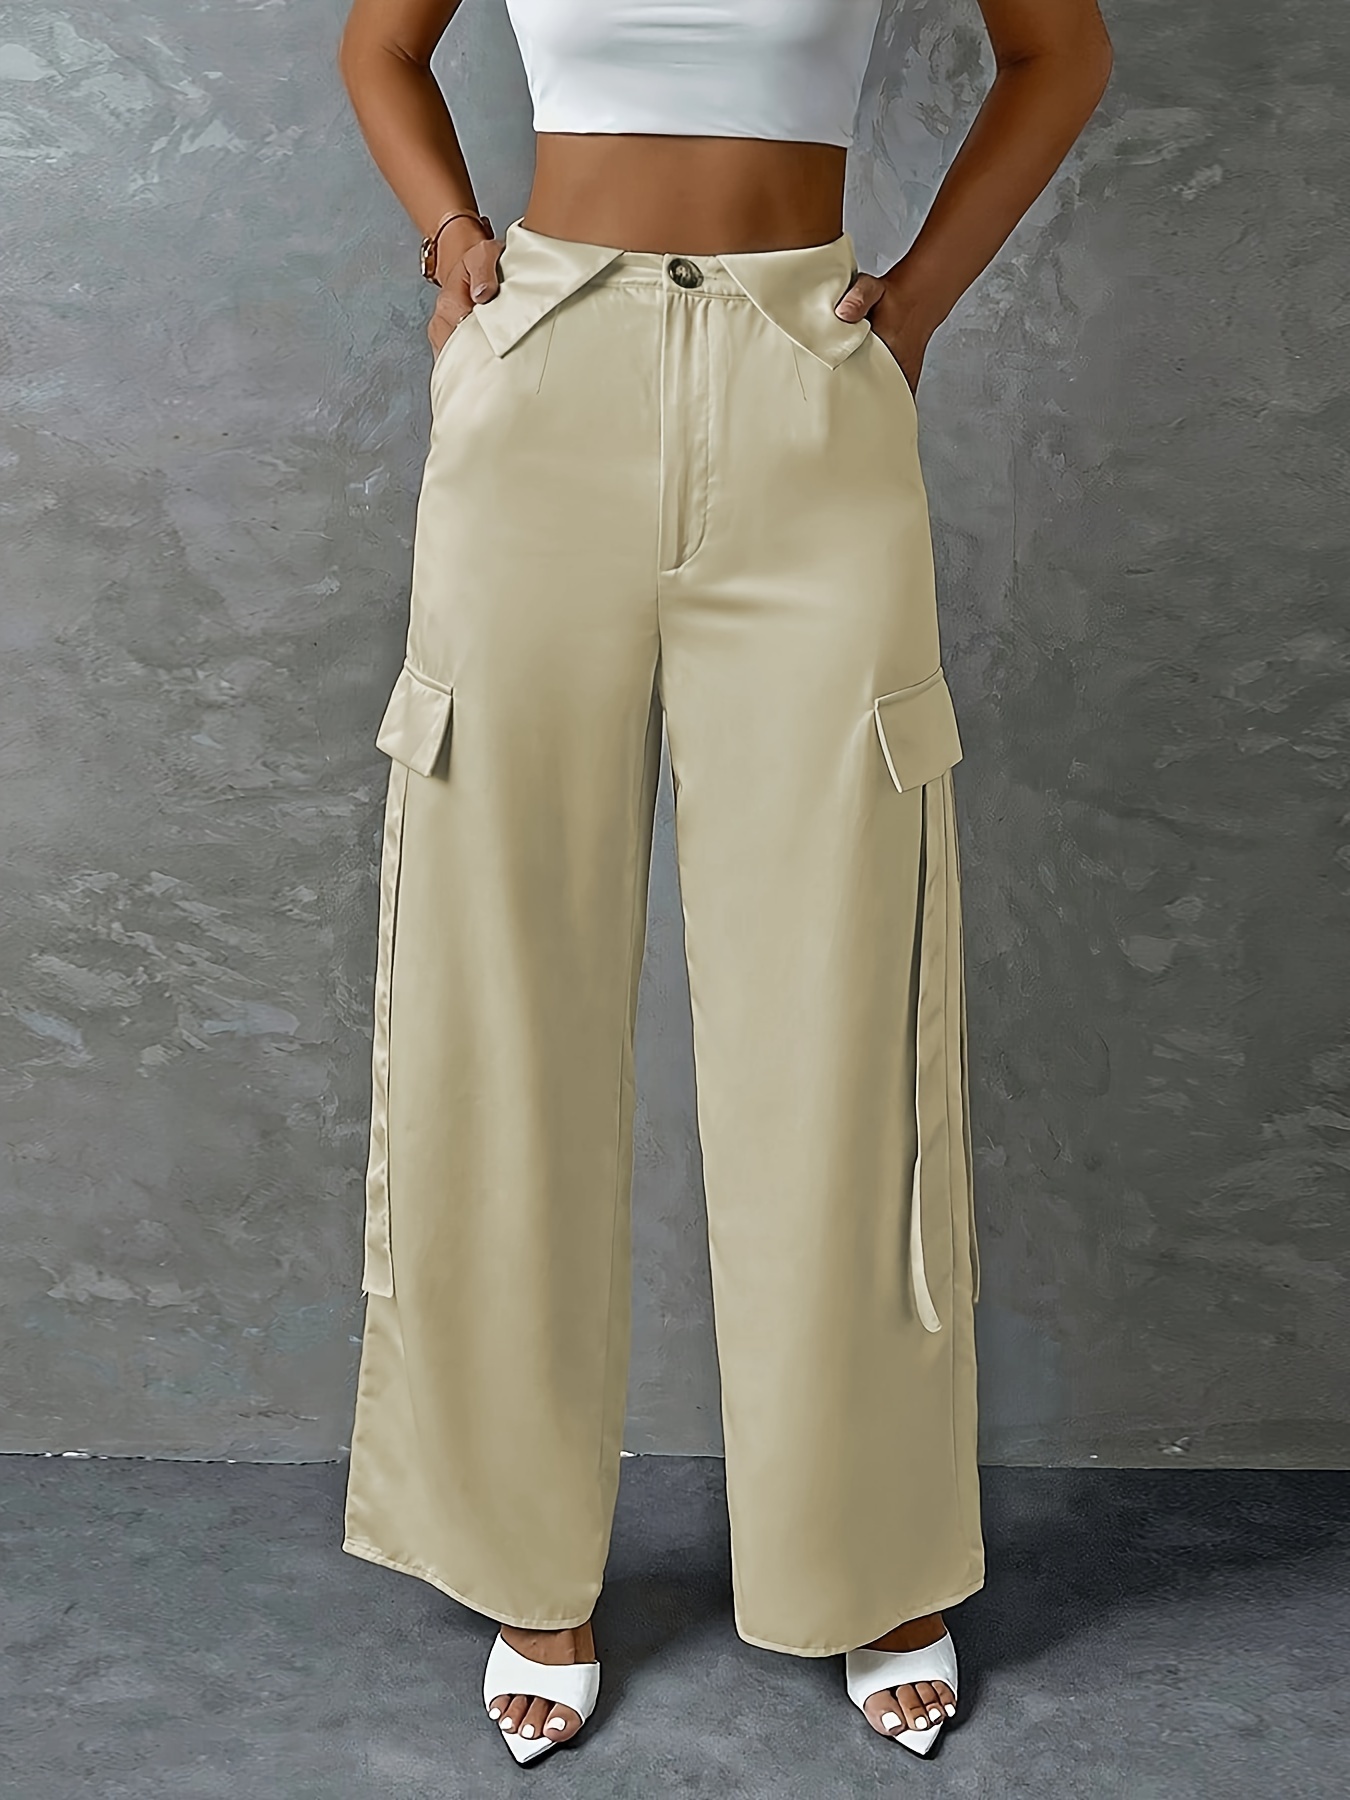 SHEIN Teen Girls' Casual Solid Color Utility High Waisted Long Pants,  Suitable For Spring, Summer And Autumn